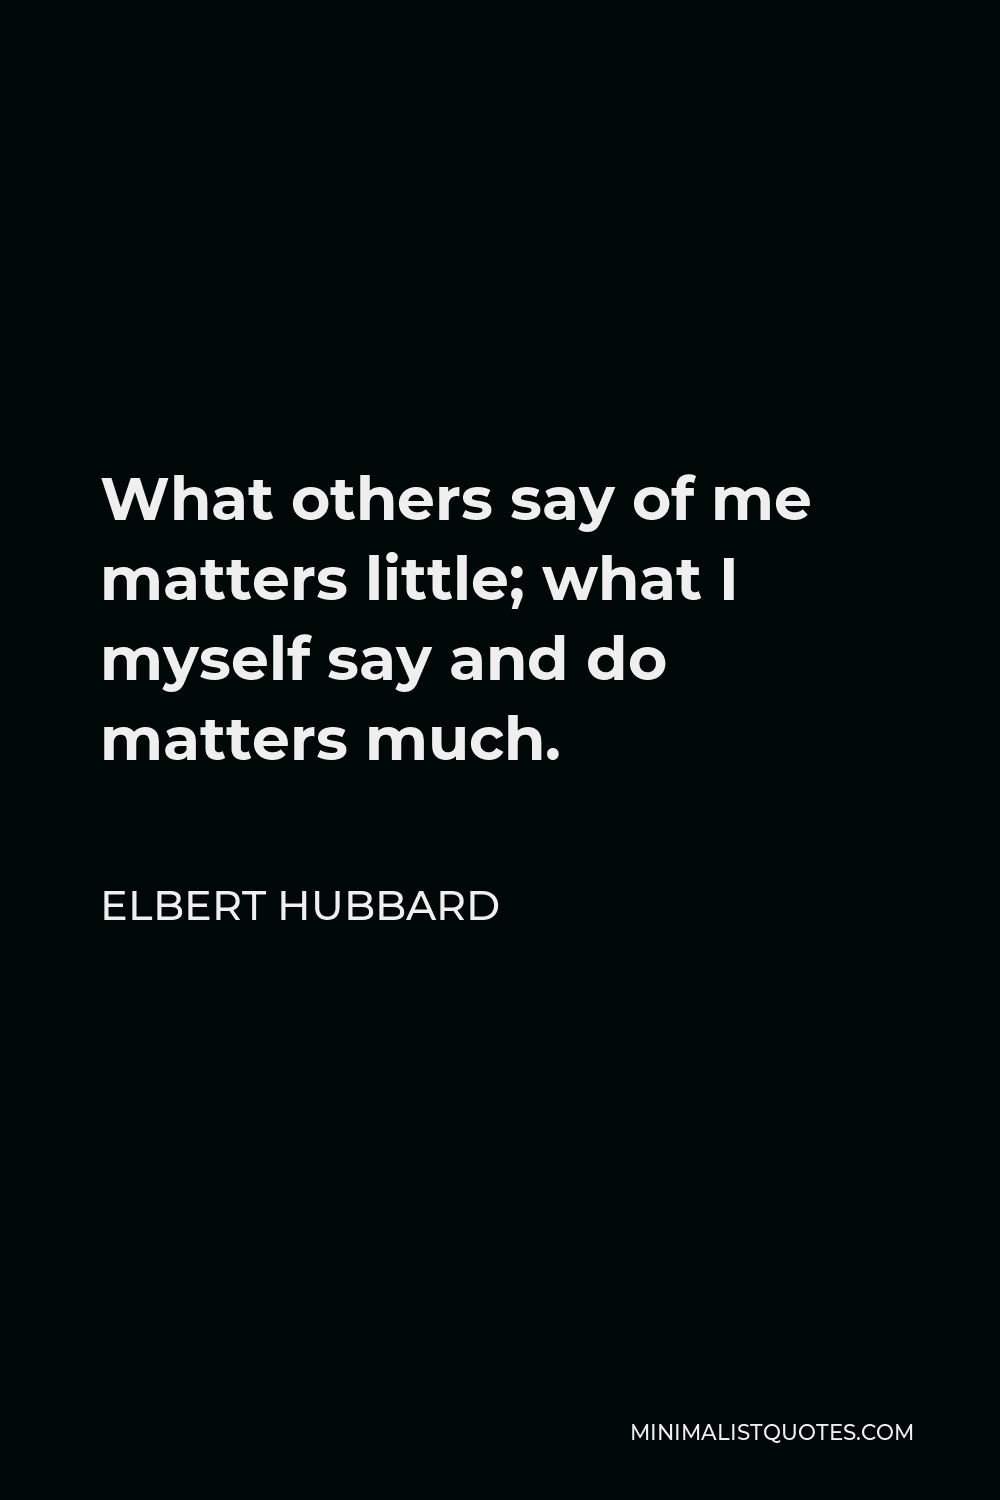 Elbert Hubbard Quote - What others say of me matters little; what I myself say and do matters much.